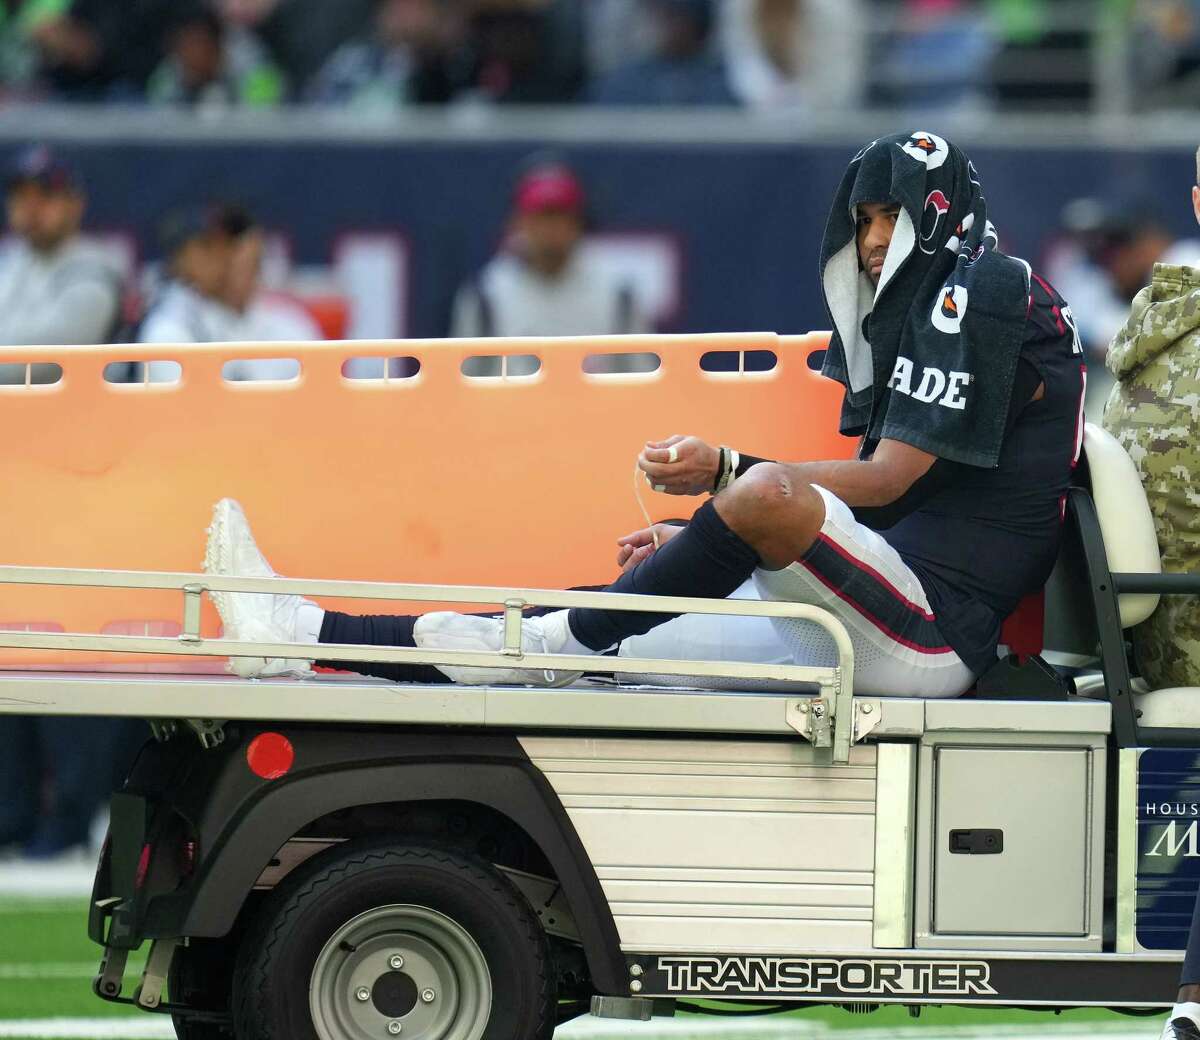 Kamu Grugier-Hill was carted off with a knee injury, but it's "not quite as bad" as originally believed, per coach David Culley, and the linebacker hasn't been ruled out of Sunday's game at Jacksonville.